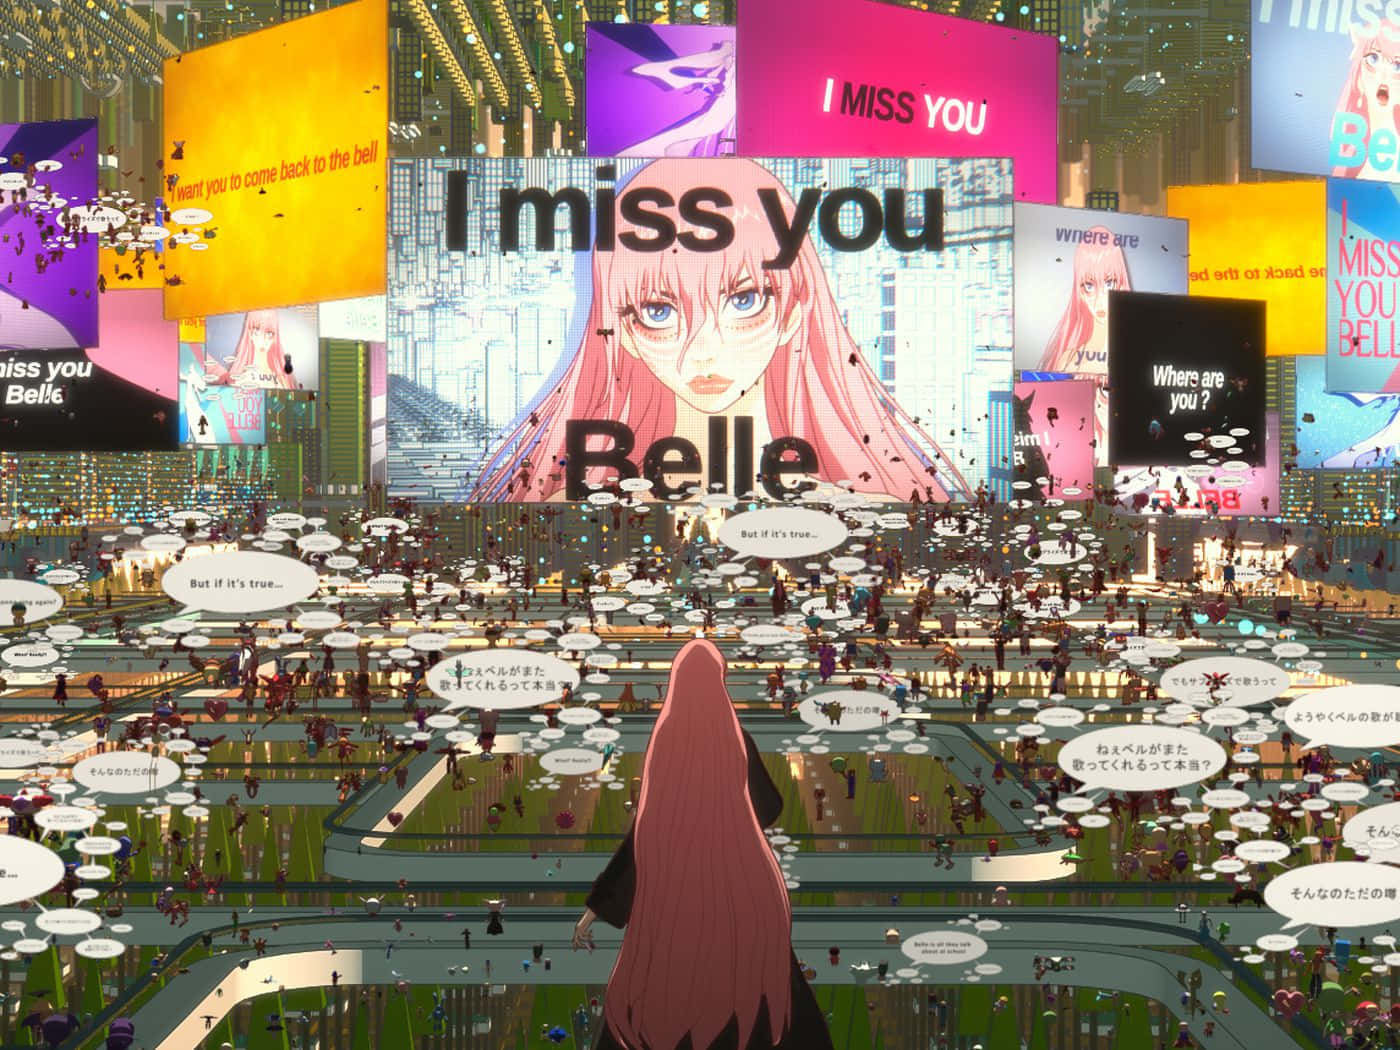 Anime Character Mightily Expressing 'Miss You' Feelings on Billboard in City Nightscape Wallpaper